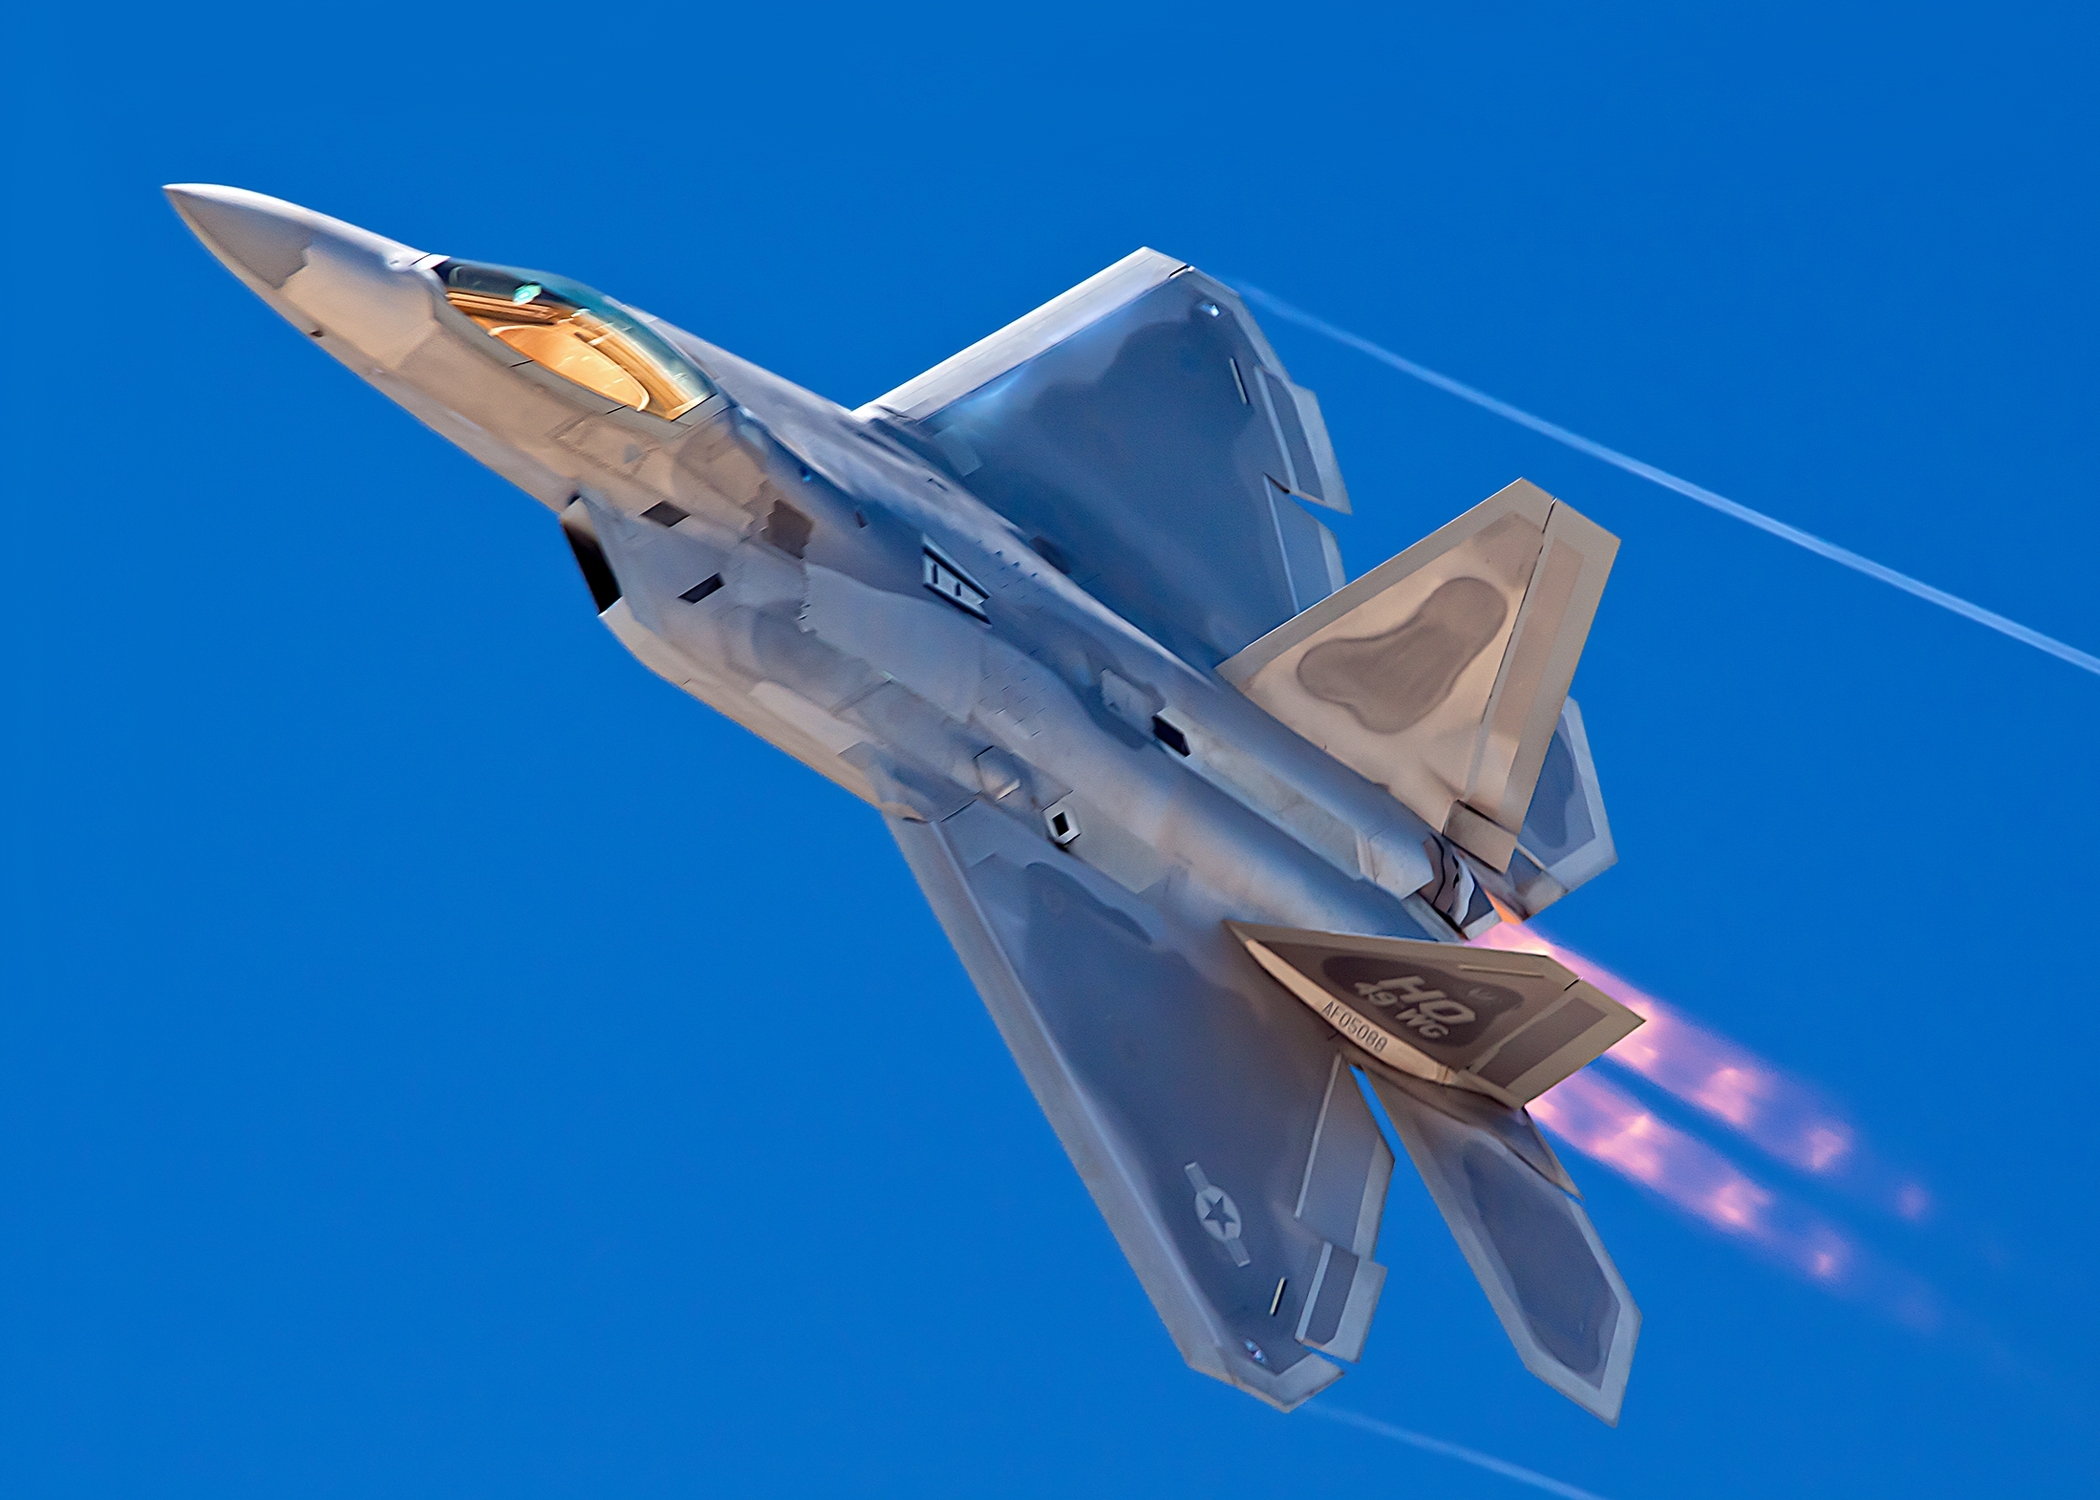 The F-22 Raptor performed its precision aerobatics at the Fort Worth  Alliance Air Show Oct. 30-31. (2100 x 1500) : reddit.com